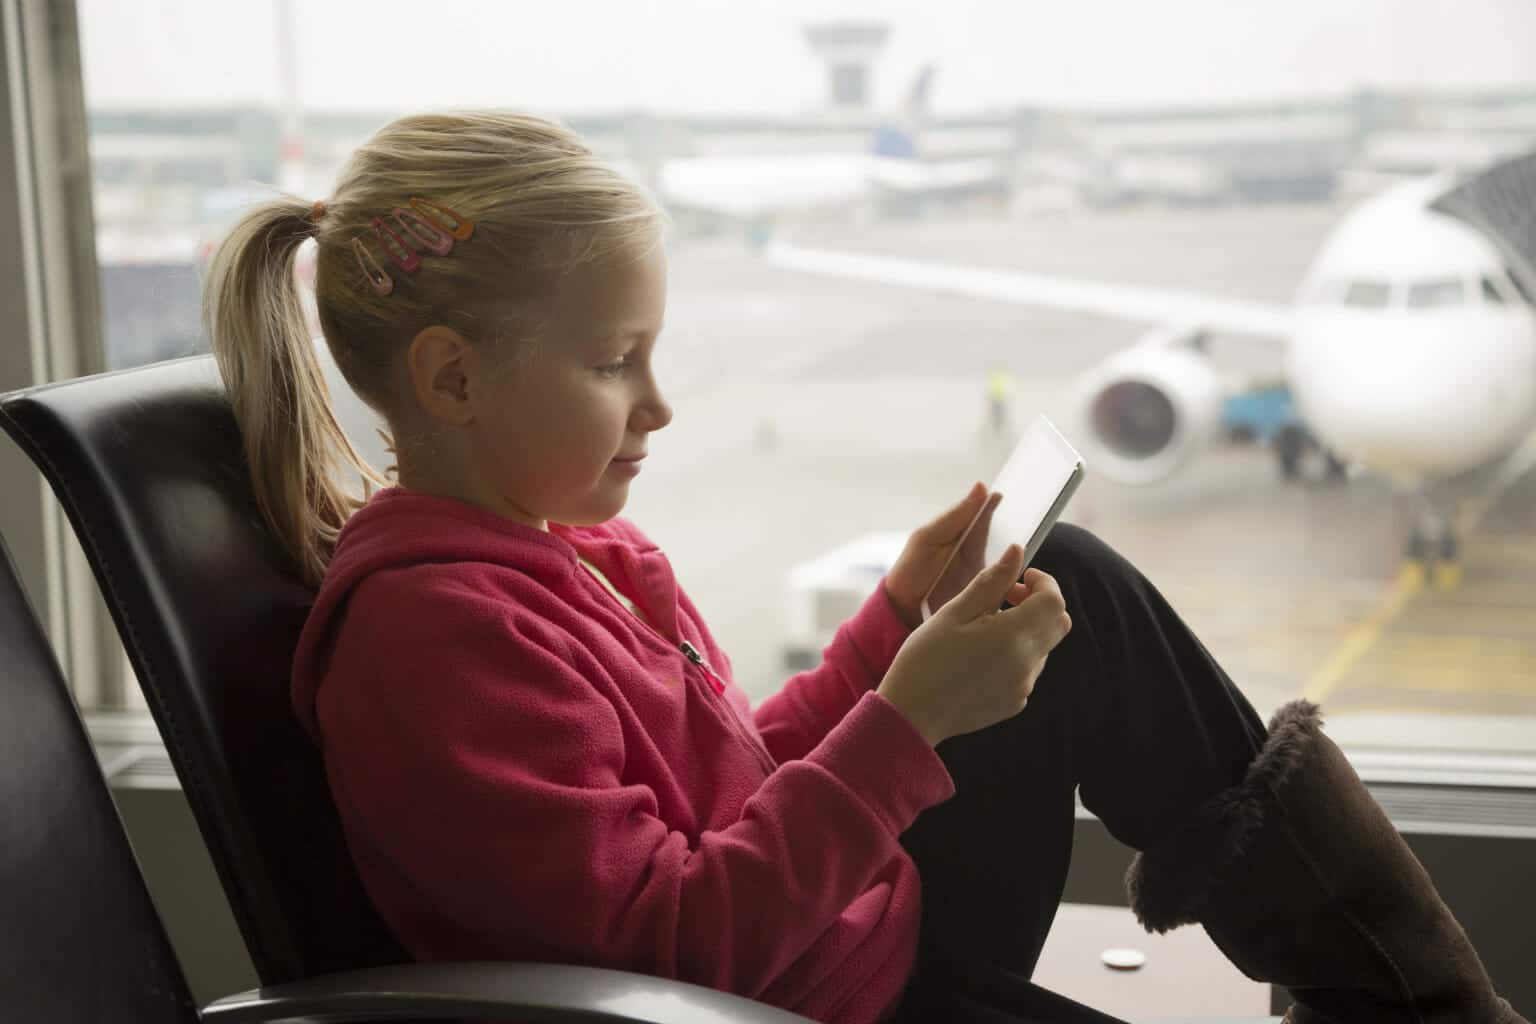 Children and down time at Airports